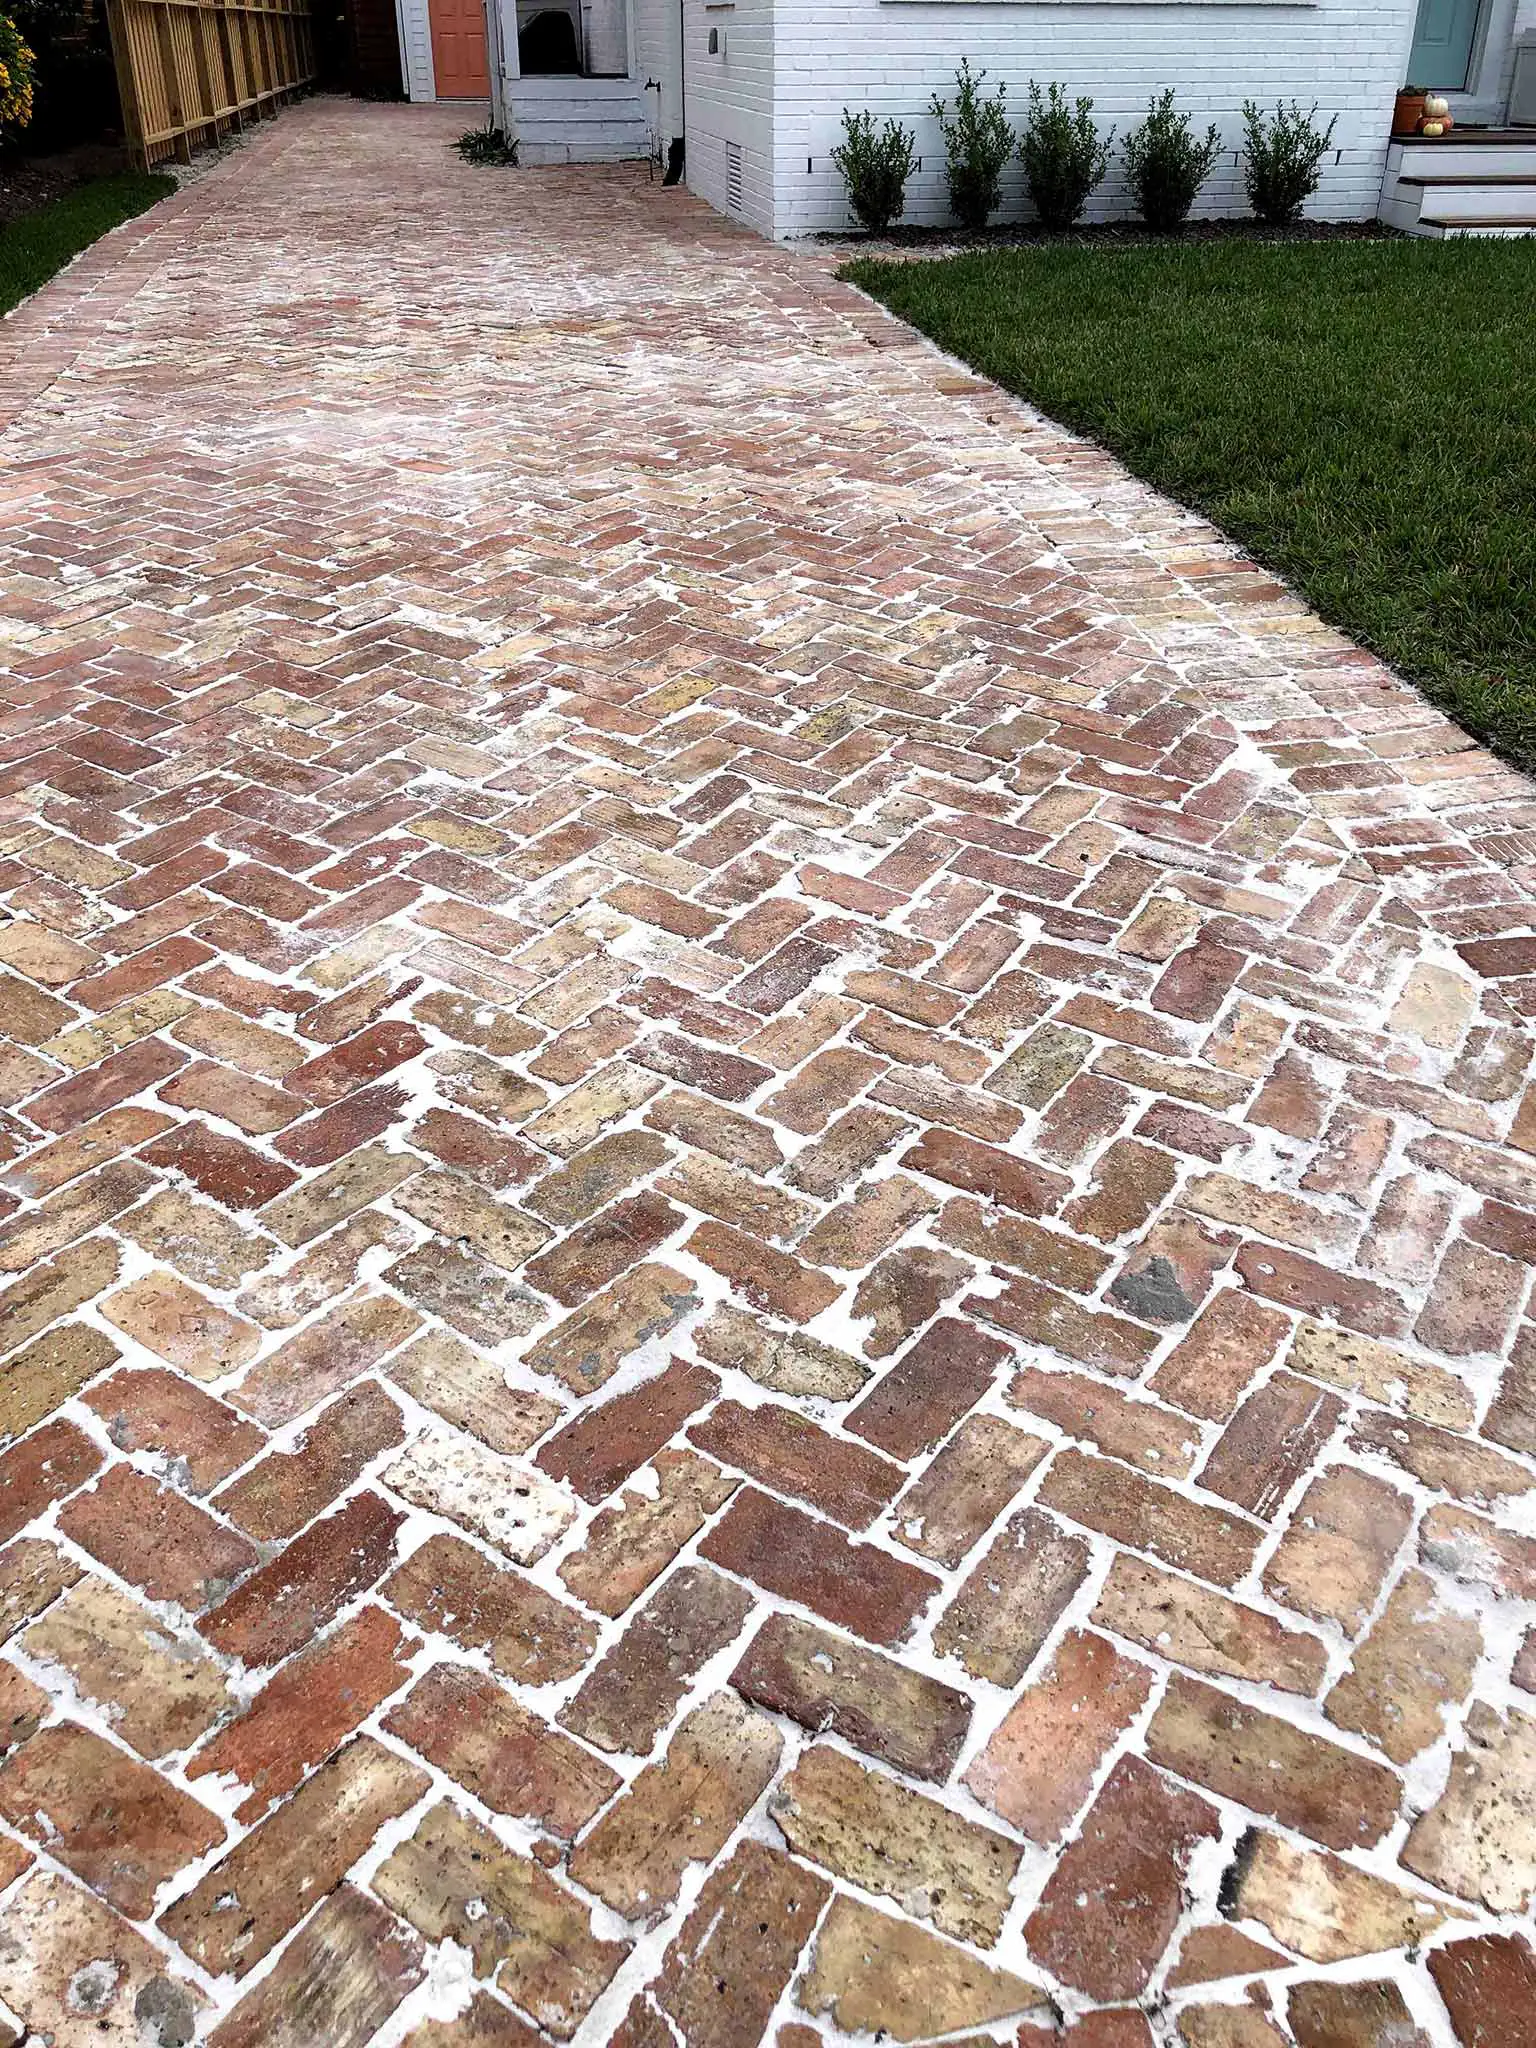 How To Clean Brick Pavery Love, How To Clean Patio Bricks